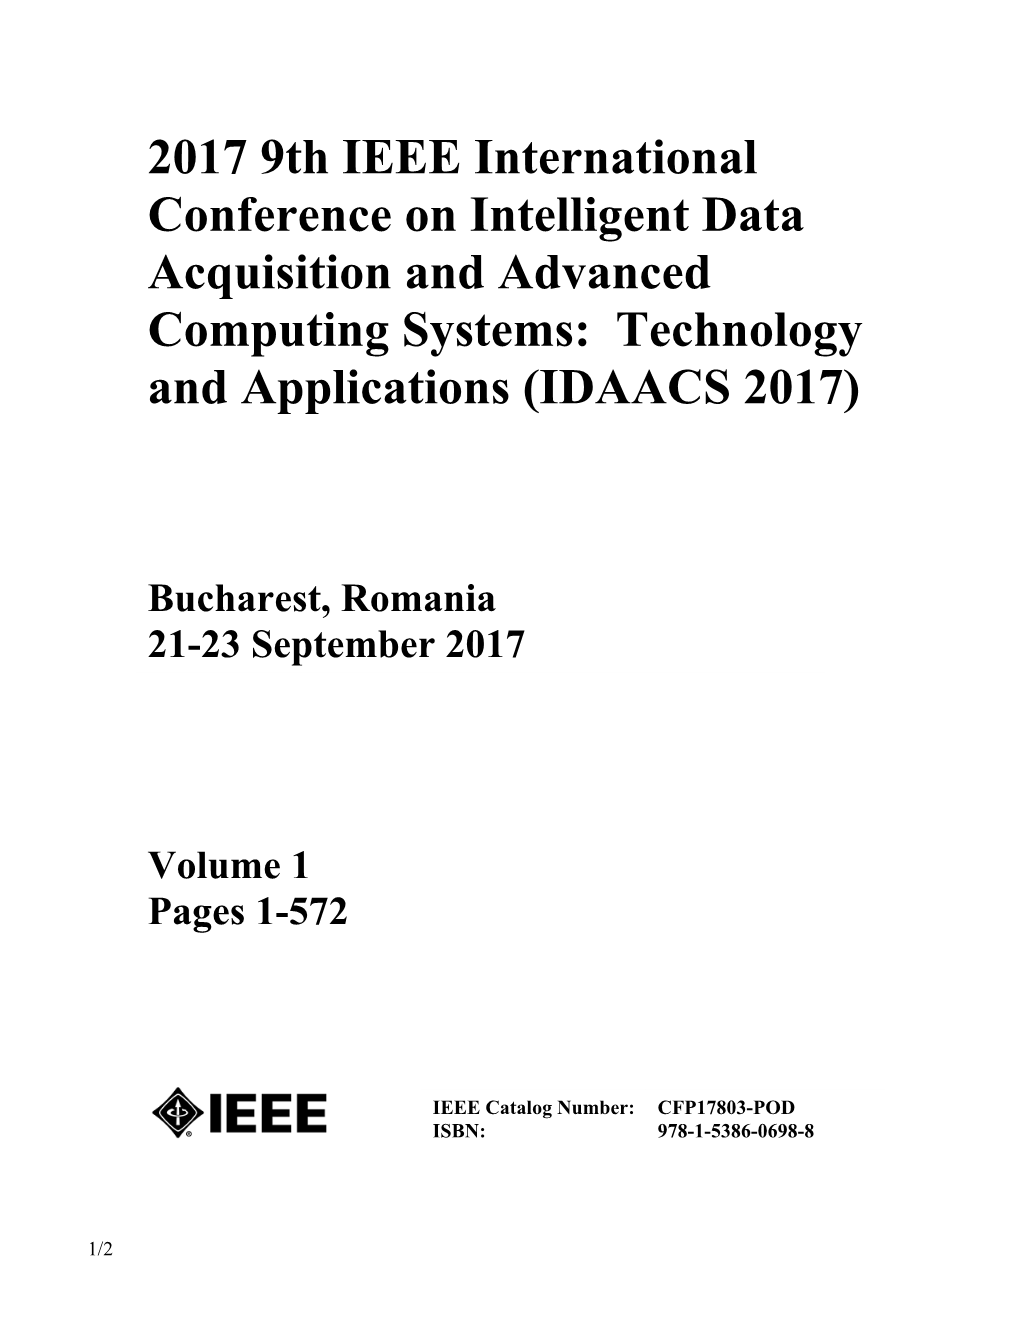 2017 9Th IEEE International Conference on Intelligent Data Acquisition and Advanced Computing Systems: Technology